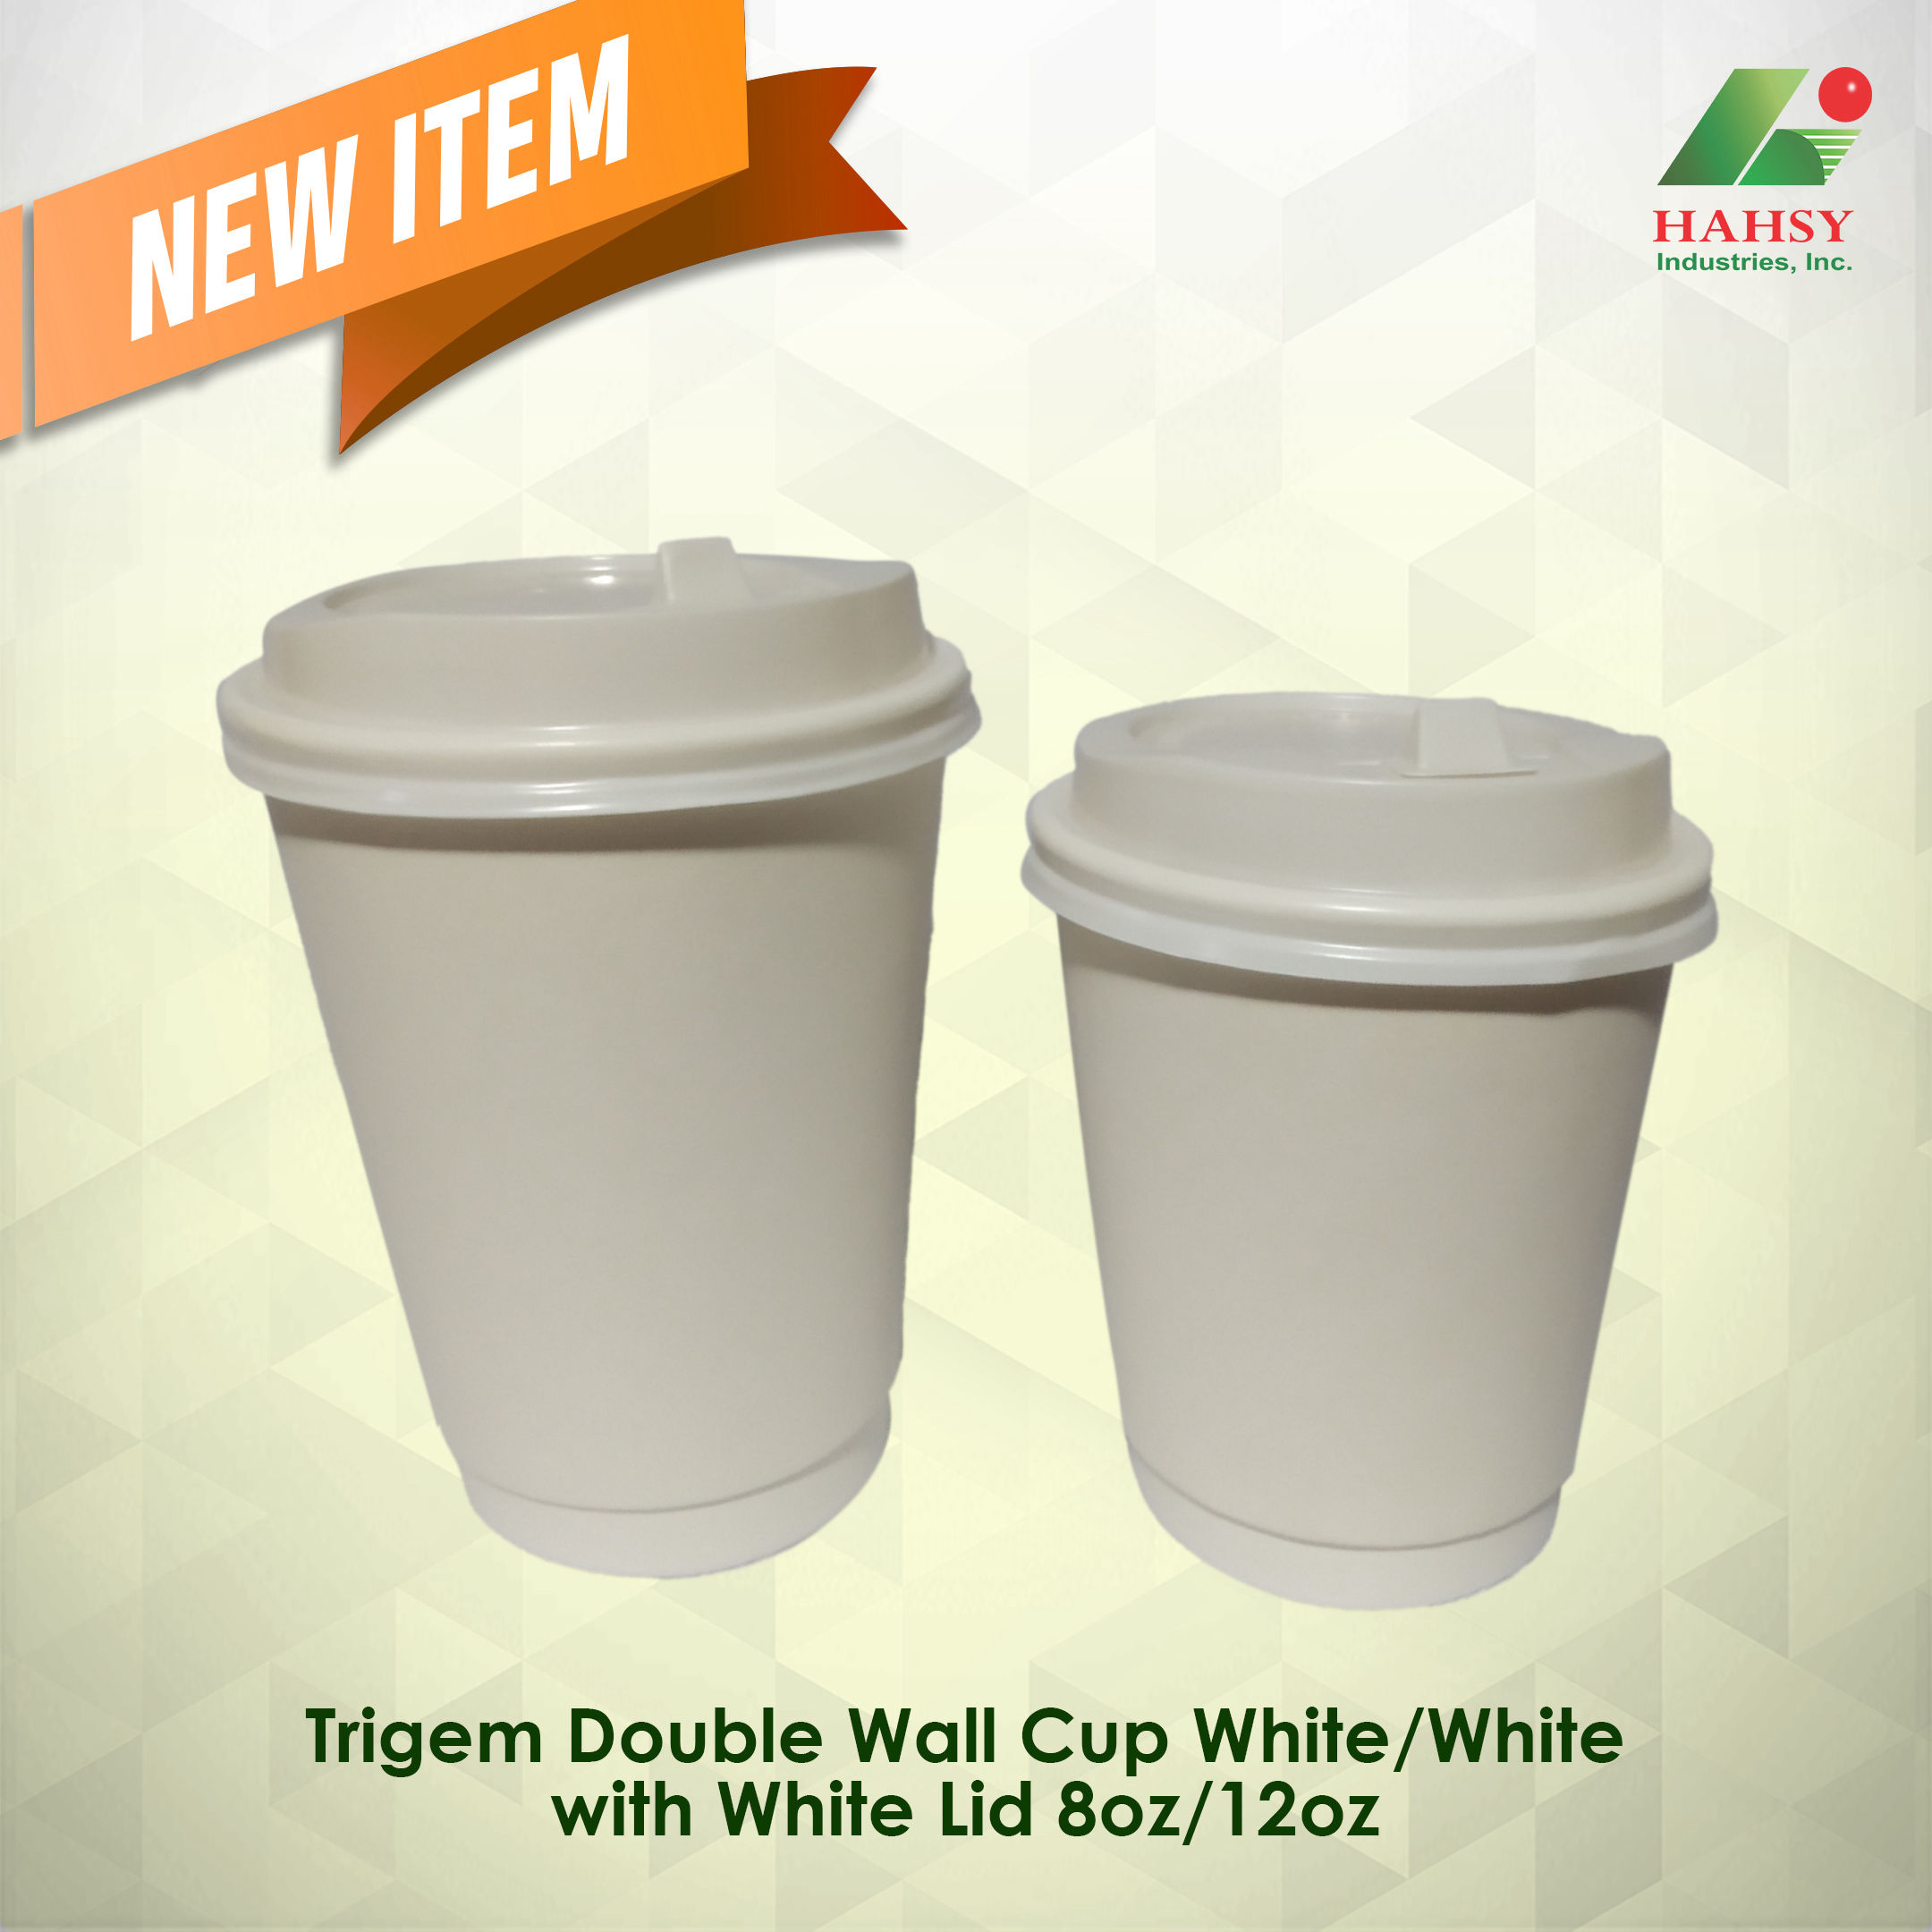 Trigem Double wall cup white with white lid 8oz 12oz